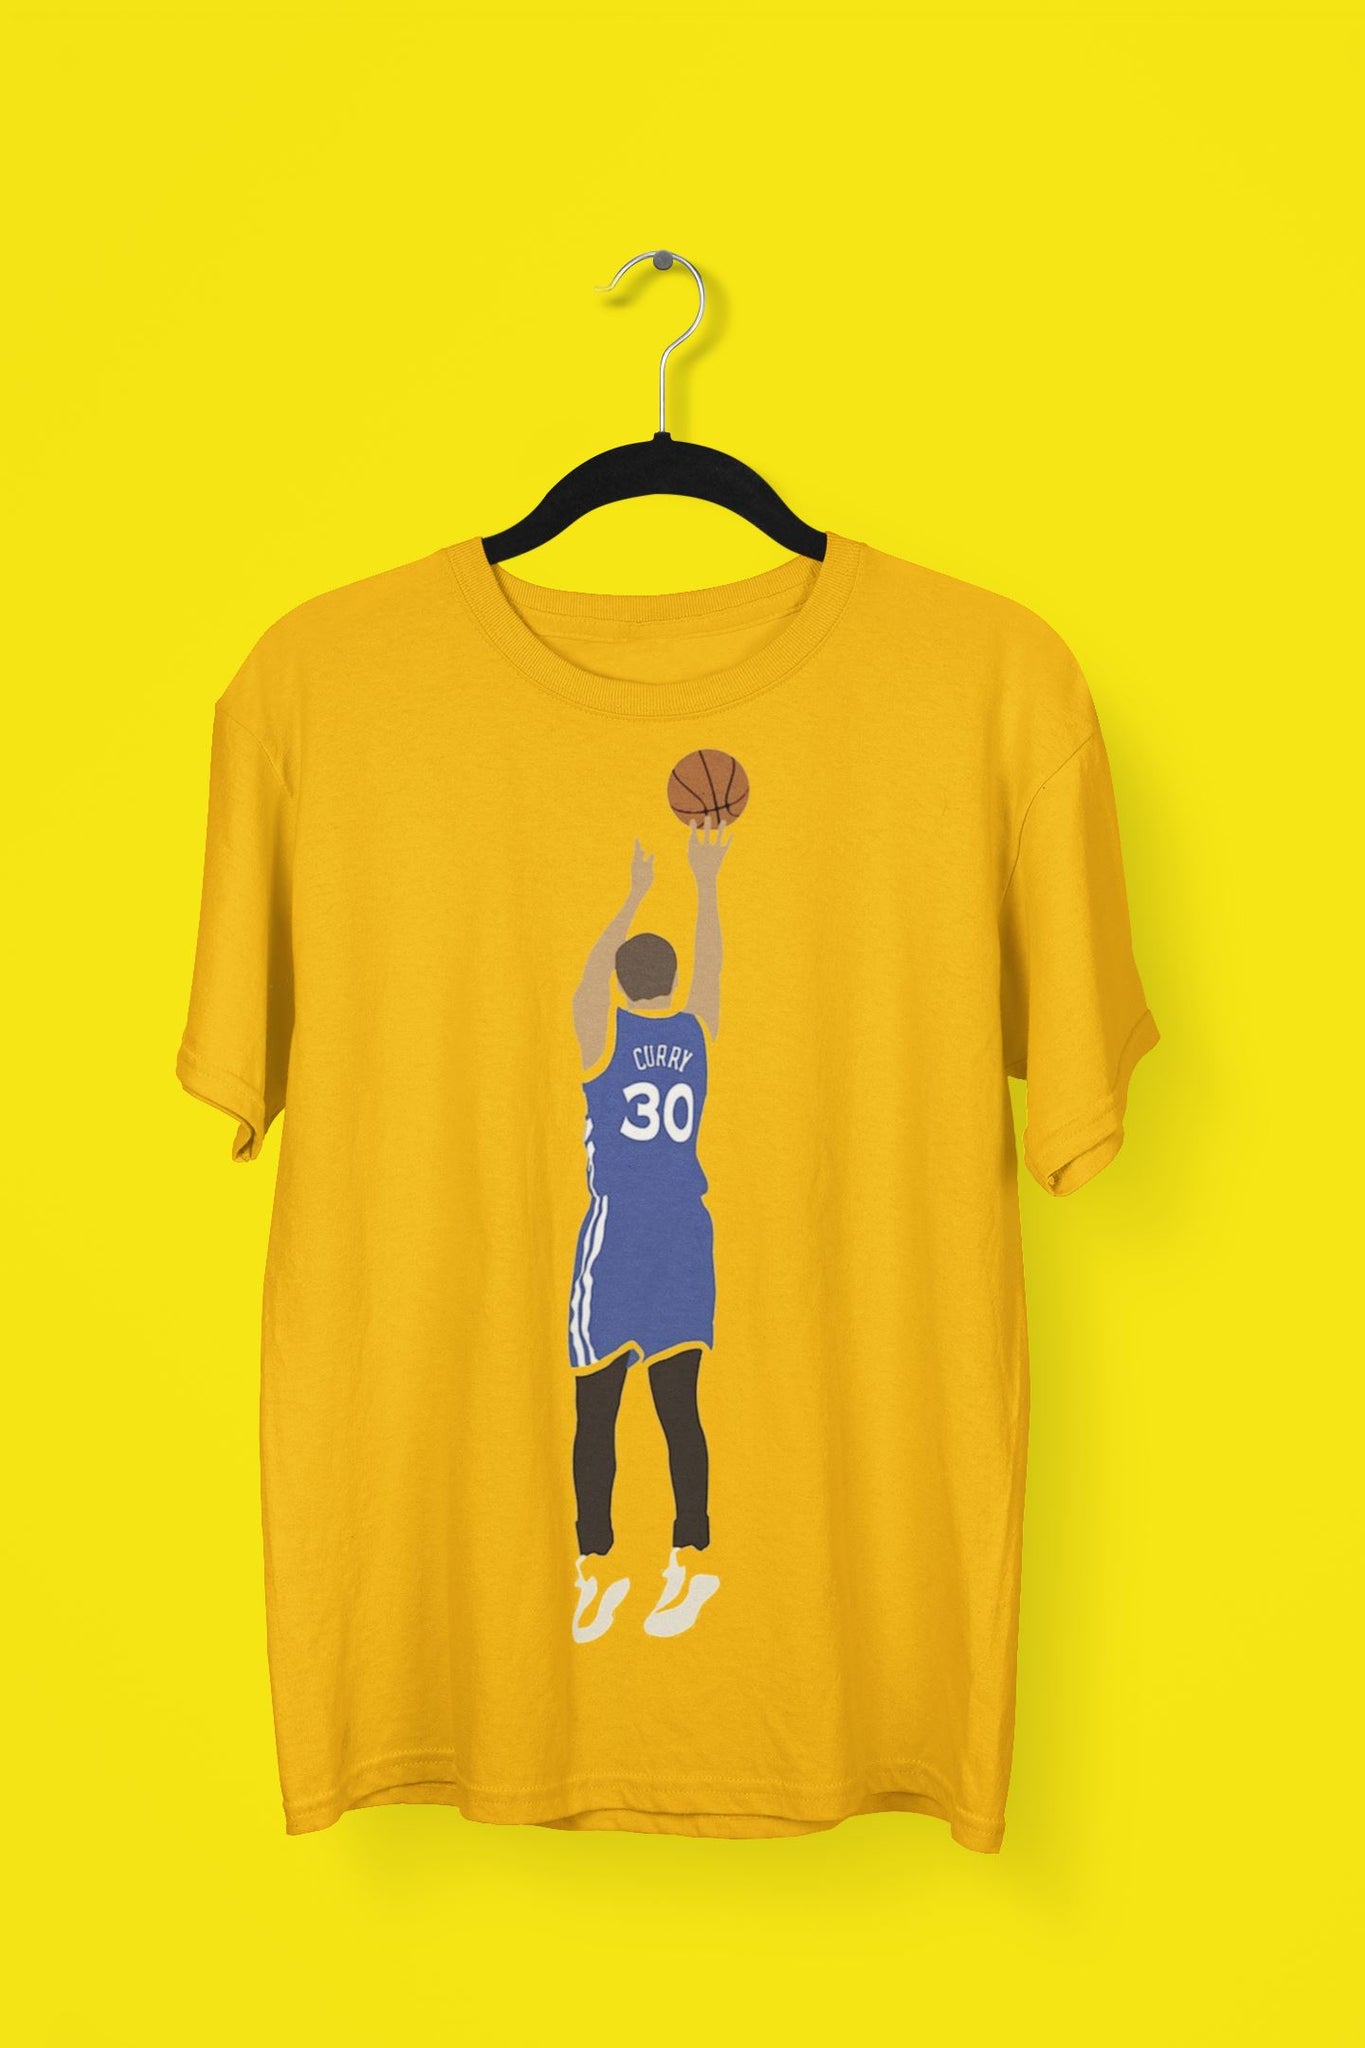 Steph Curry Shooting His Shot Official 3 Pointer T Shirt for Men and Women freeshipping - Catch My Drift India